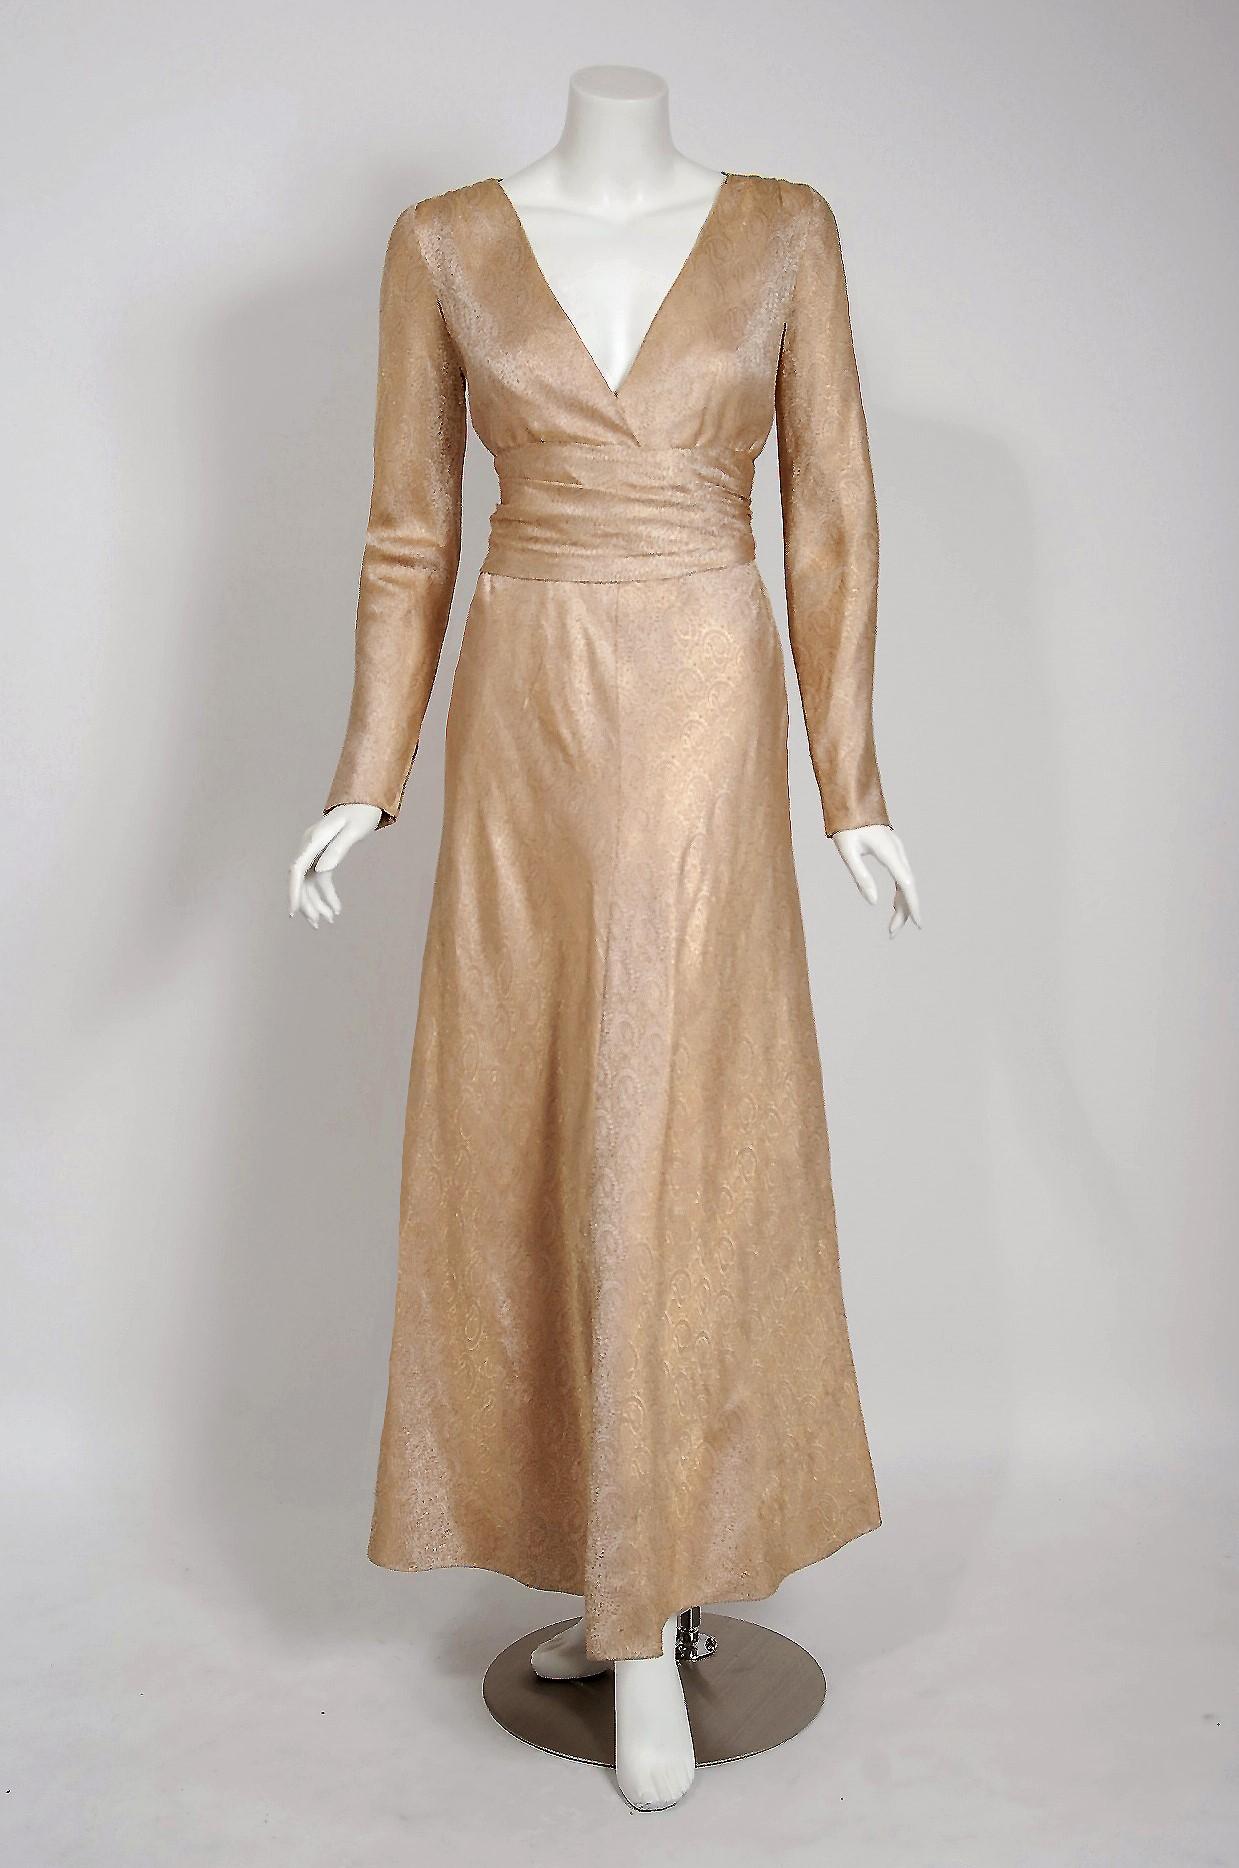 Givenchy, the name itself evokes glamour, refined elegance, simplicity and style. Givenchy's trademark of sculpted lines and luxurious fabrics make his work easily recognizable. This gorgeous gold gown, dating back to his 1977 haute couture